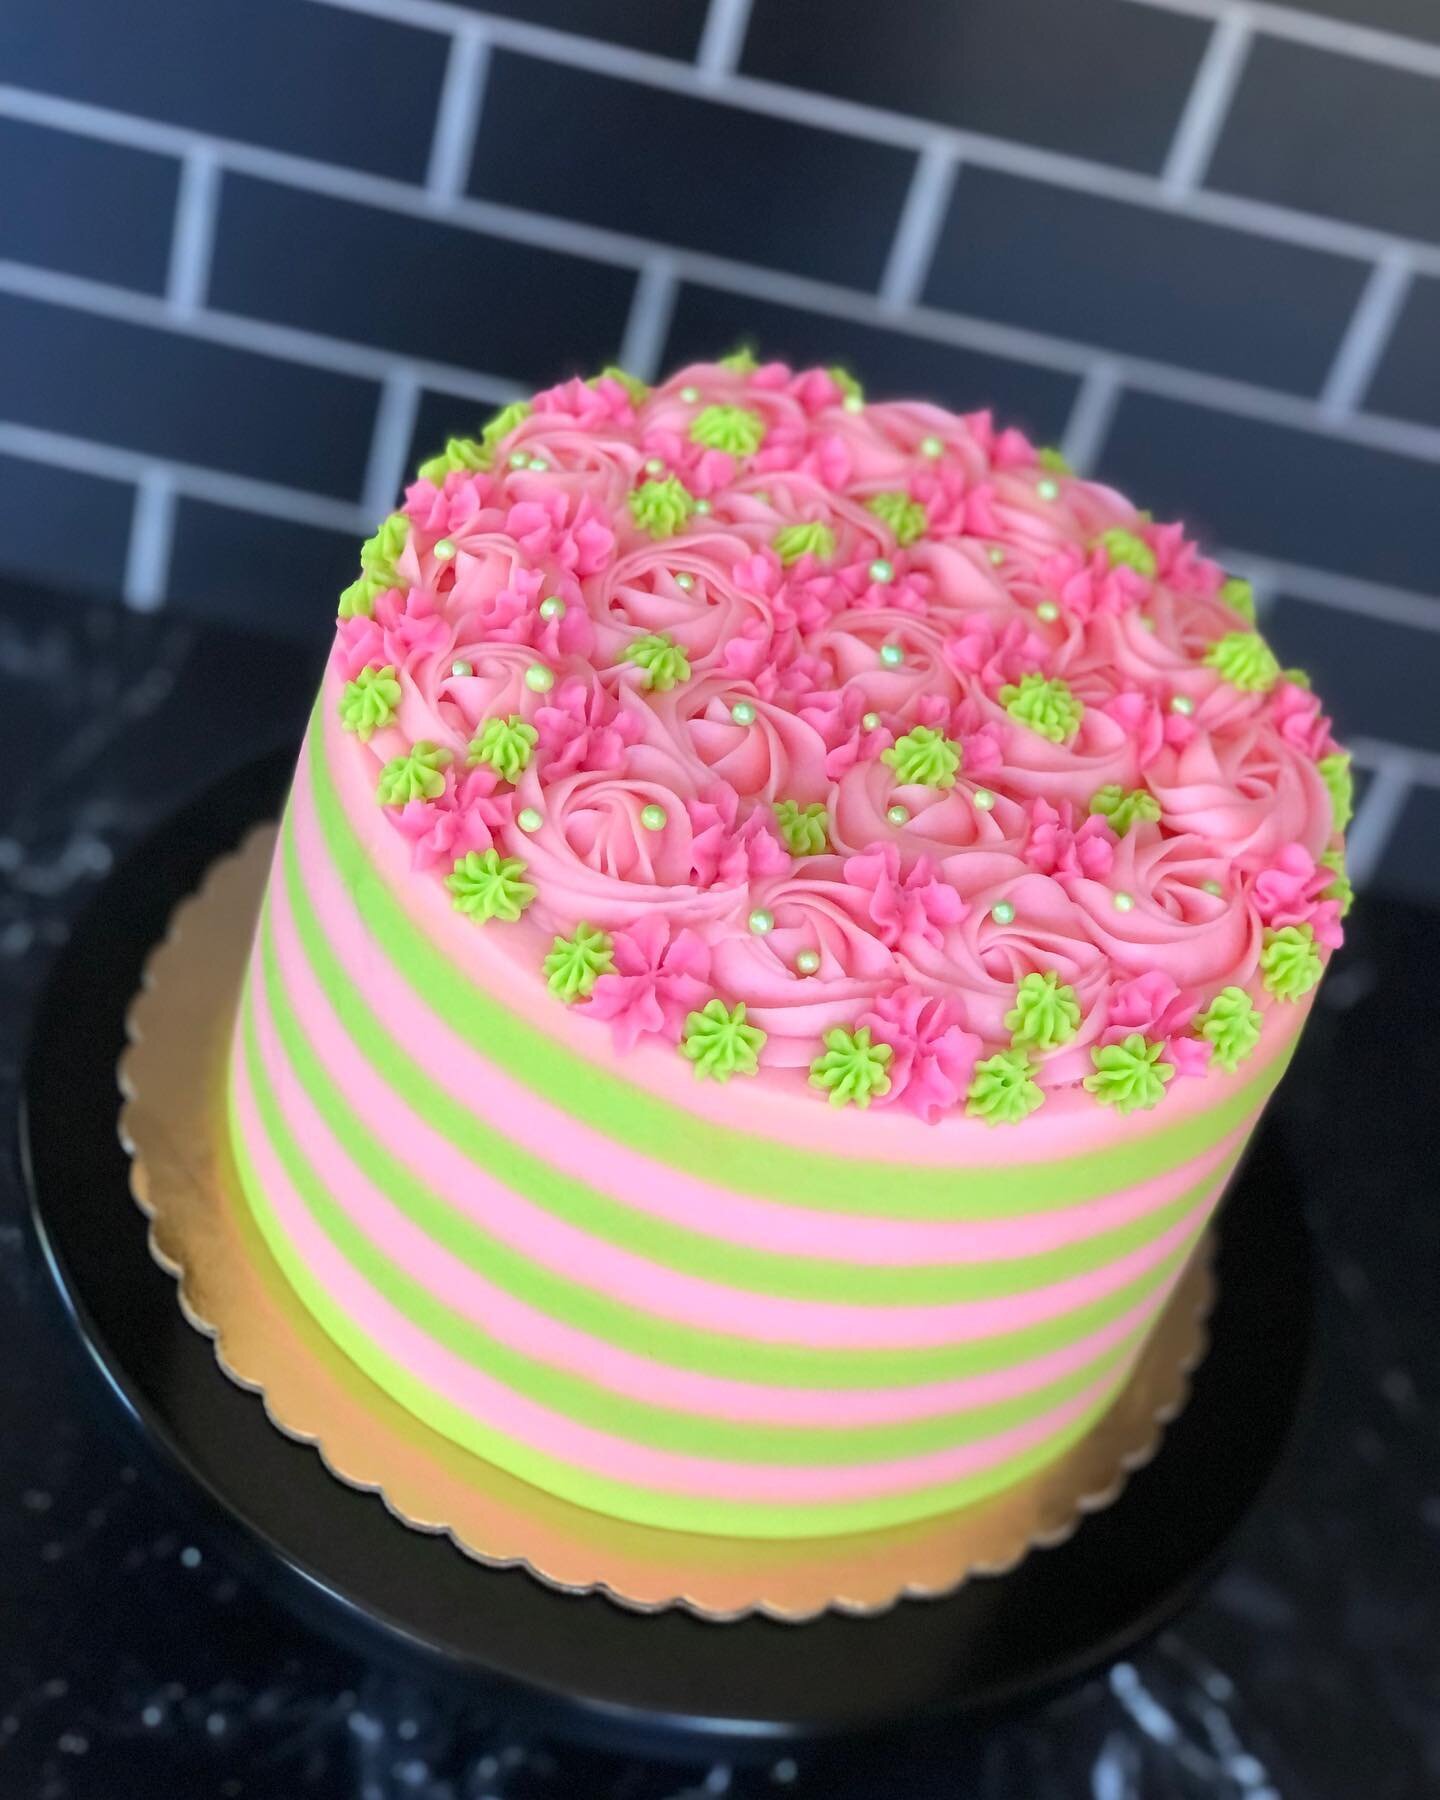 A colorful cake for a 20 something! Hope you had a great day!